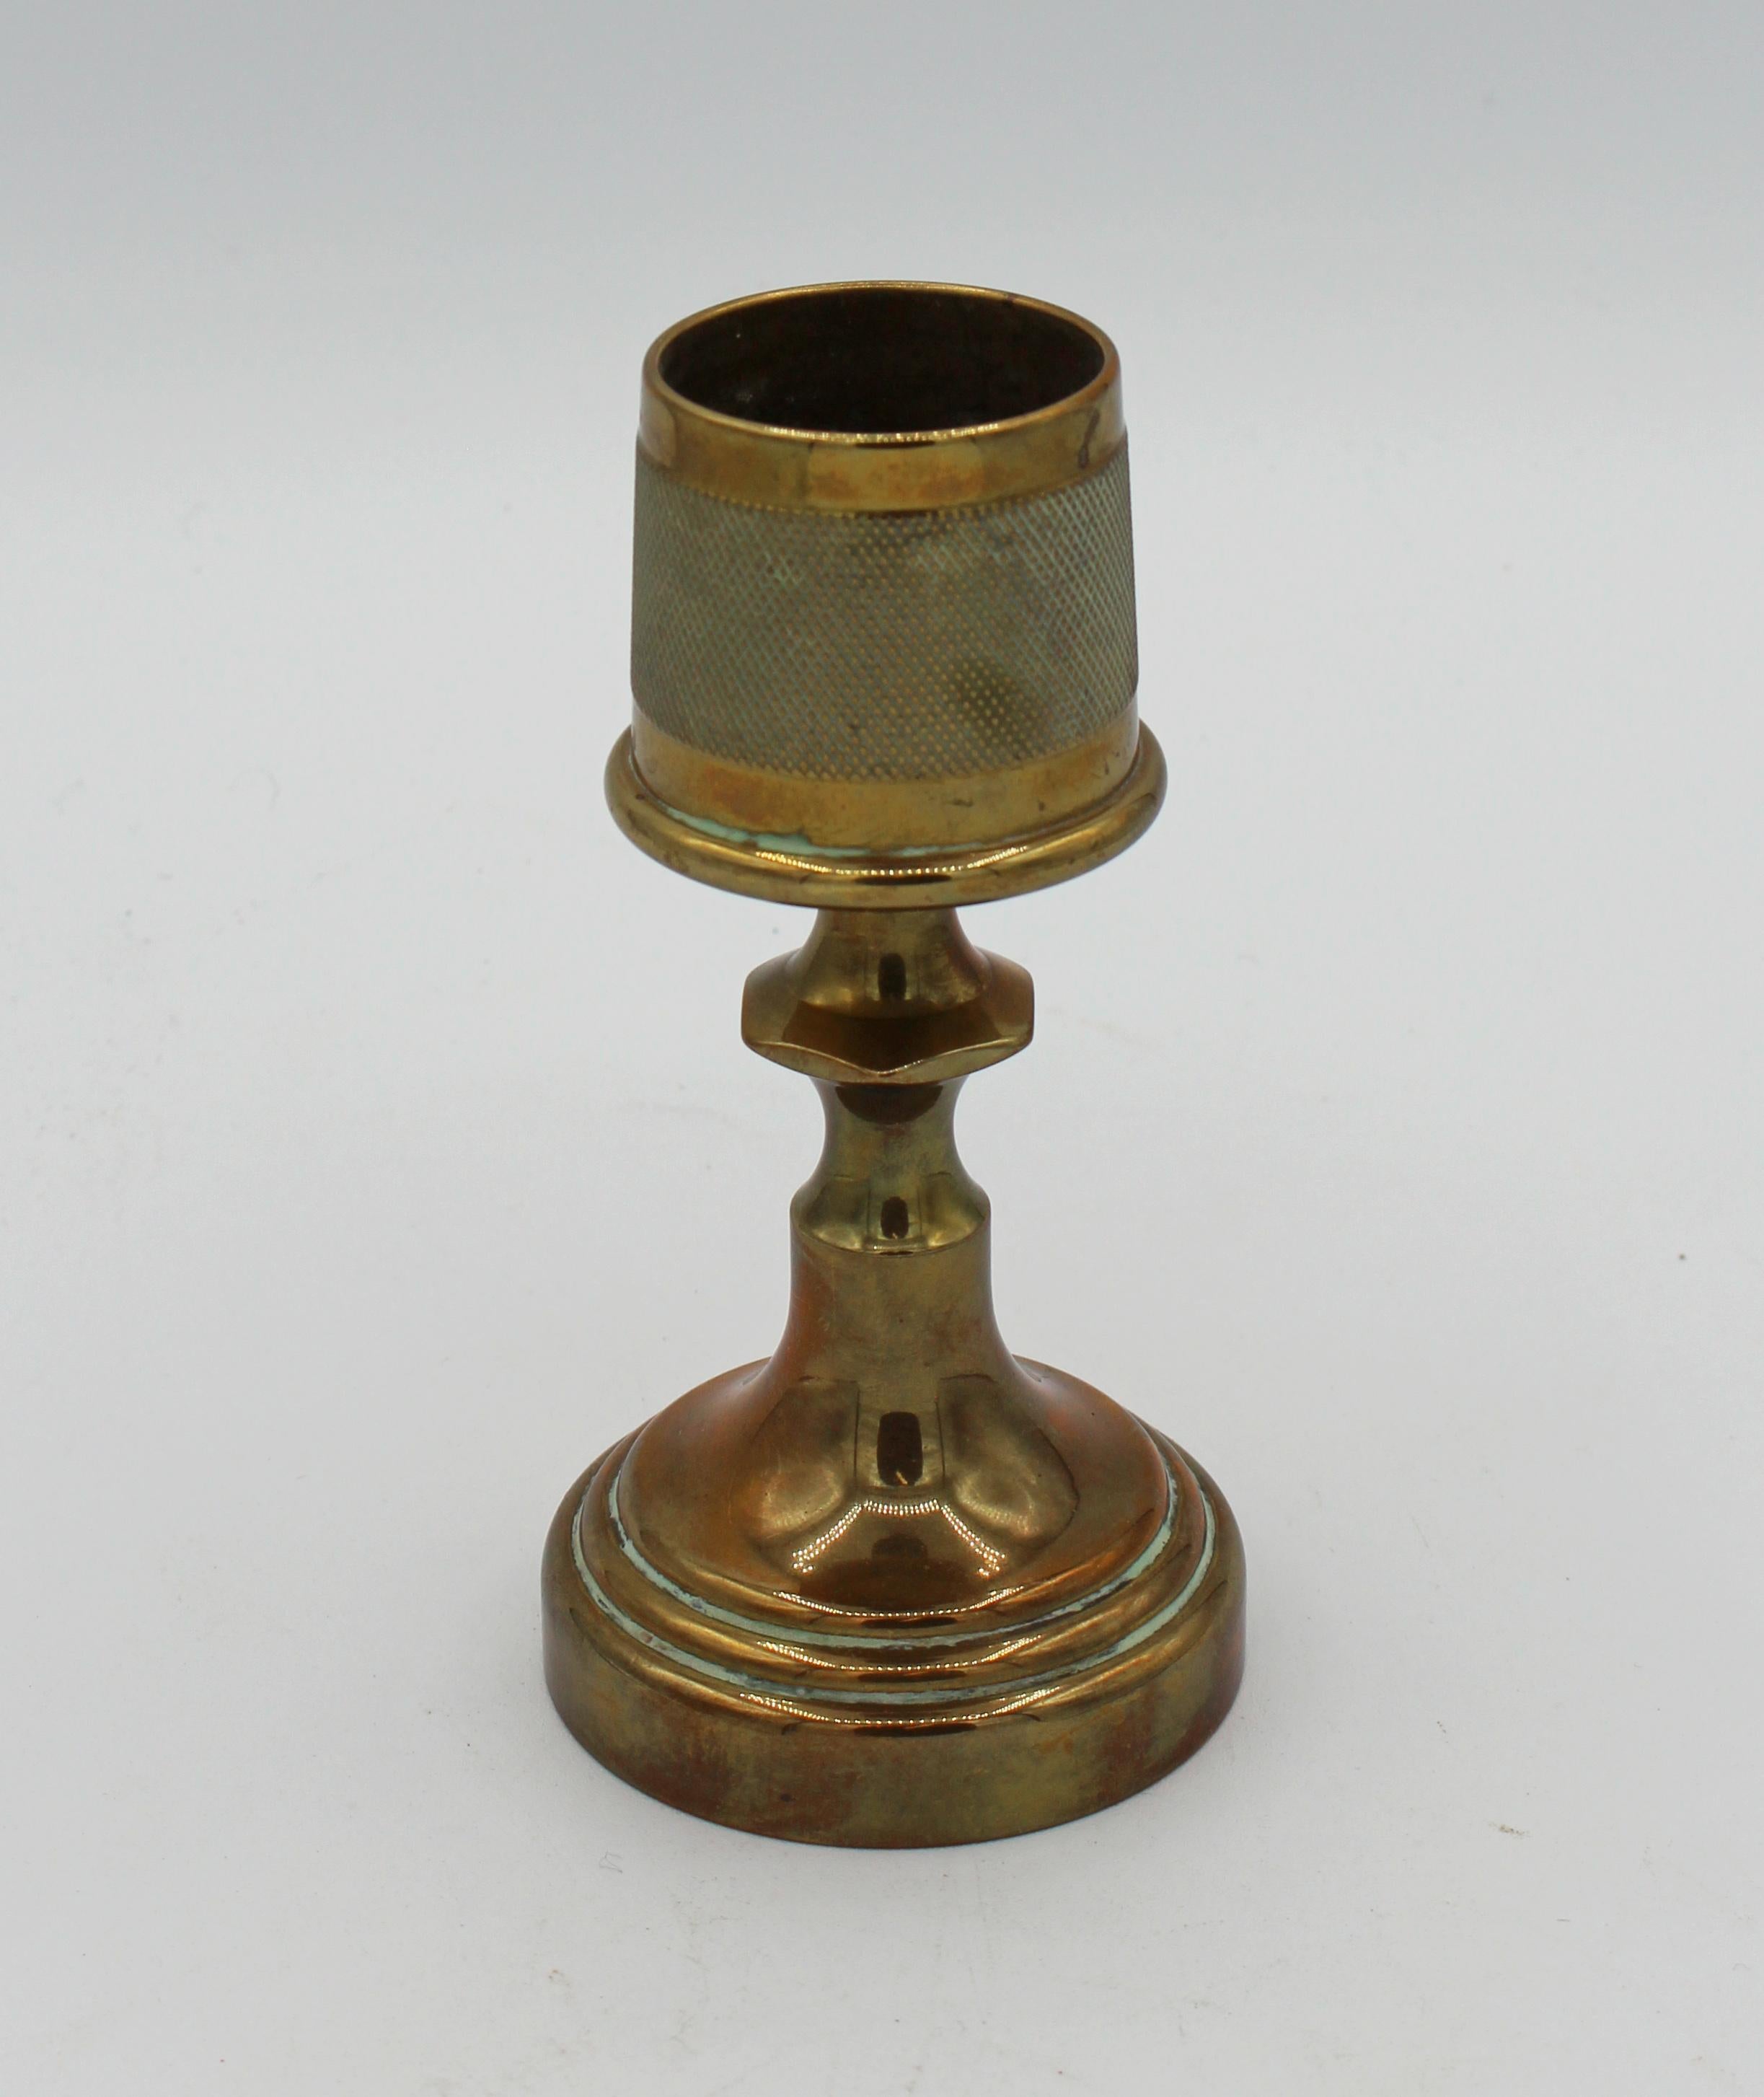 A handsome brass match strike & holder, Edwardian, c. 1900, English. Heavily weighted for stability on a gentleman's desk or in a London gentleman's club. The strike area is worn and no longer functions. 4 7/8